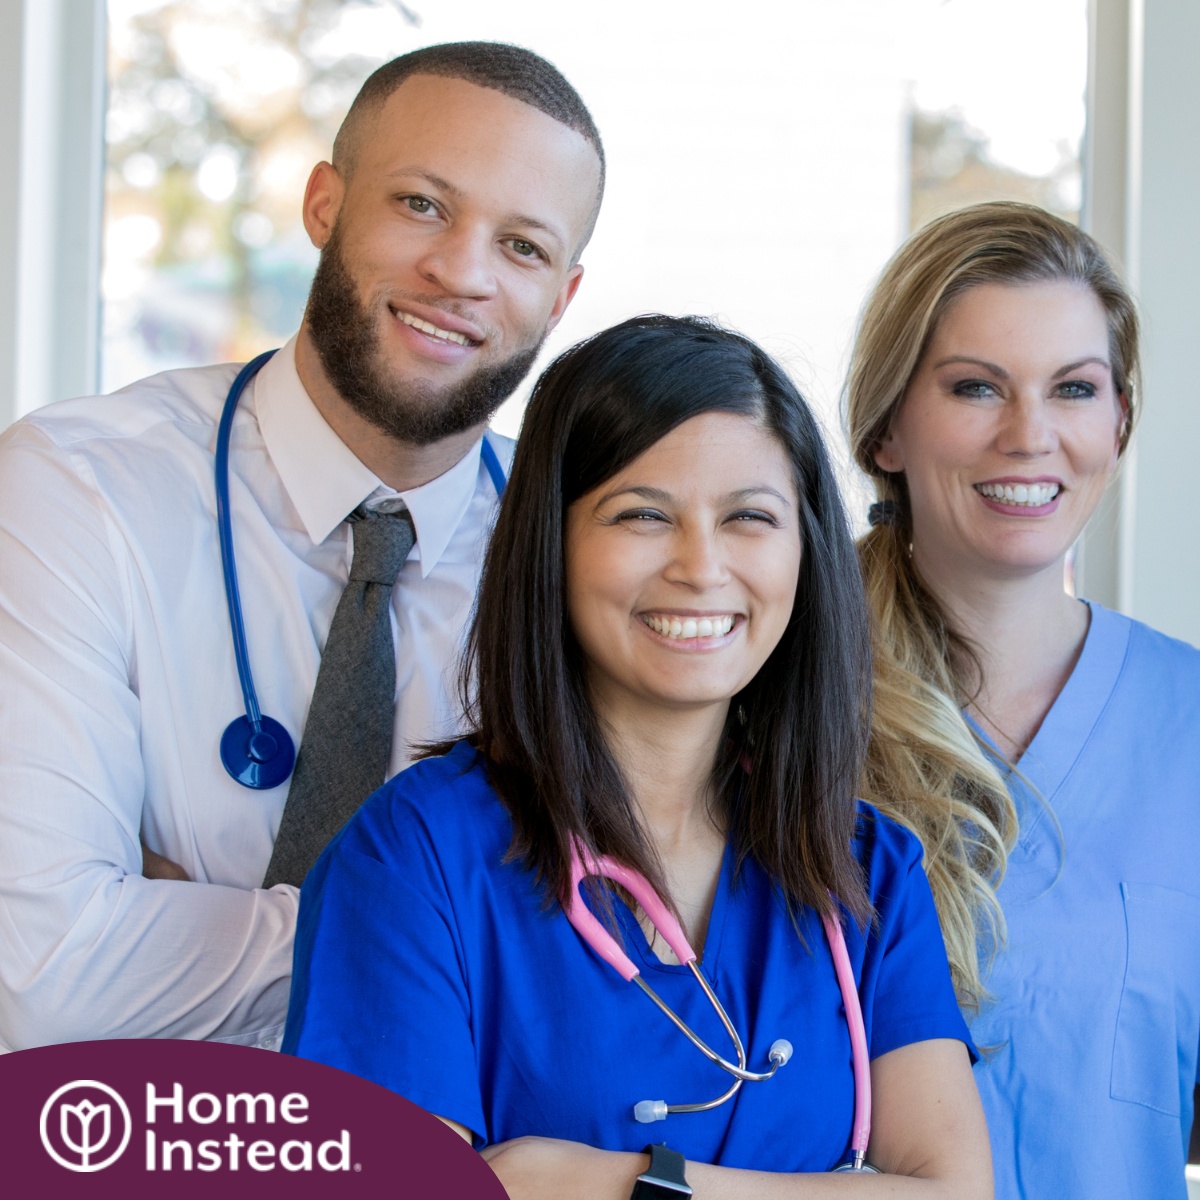 A team of healthcare professional smiles, representing the many career paths that professional caregiving can lead to.